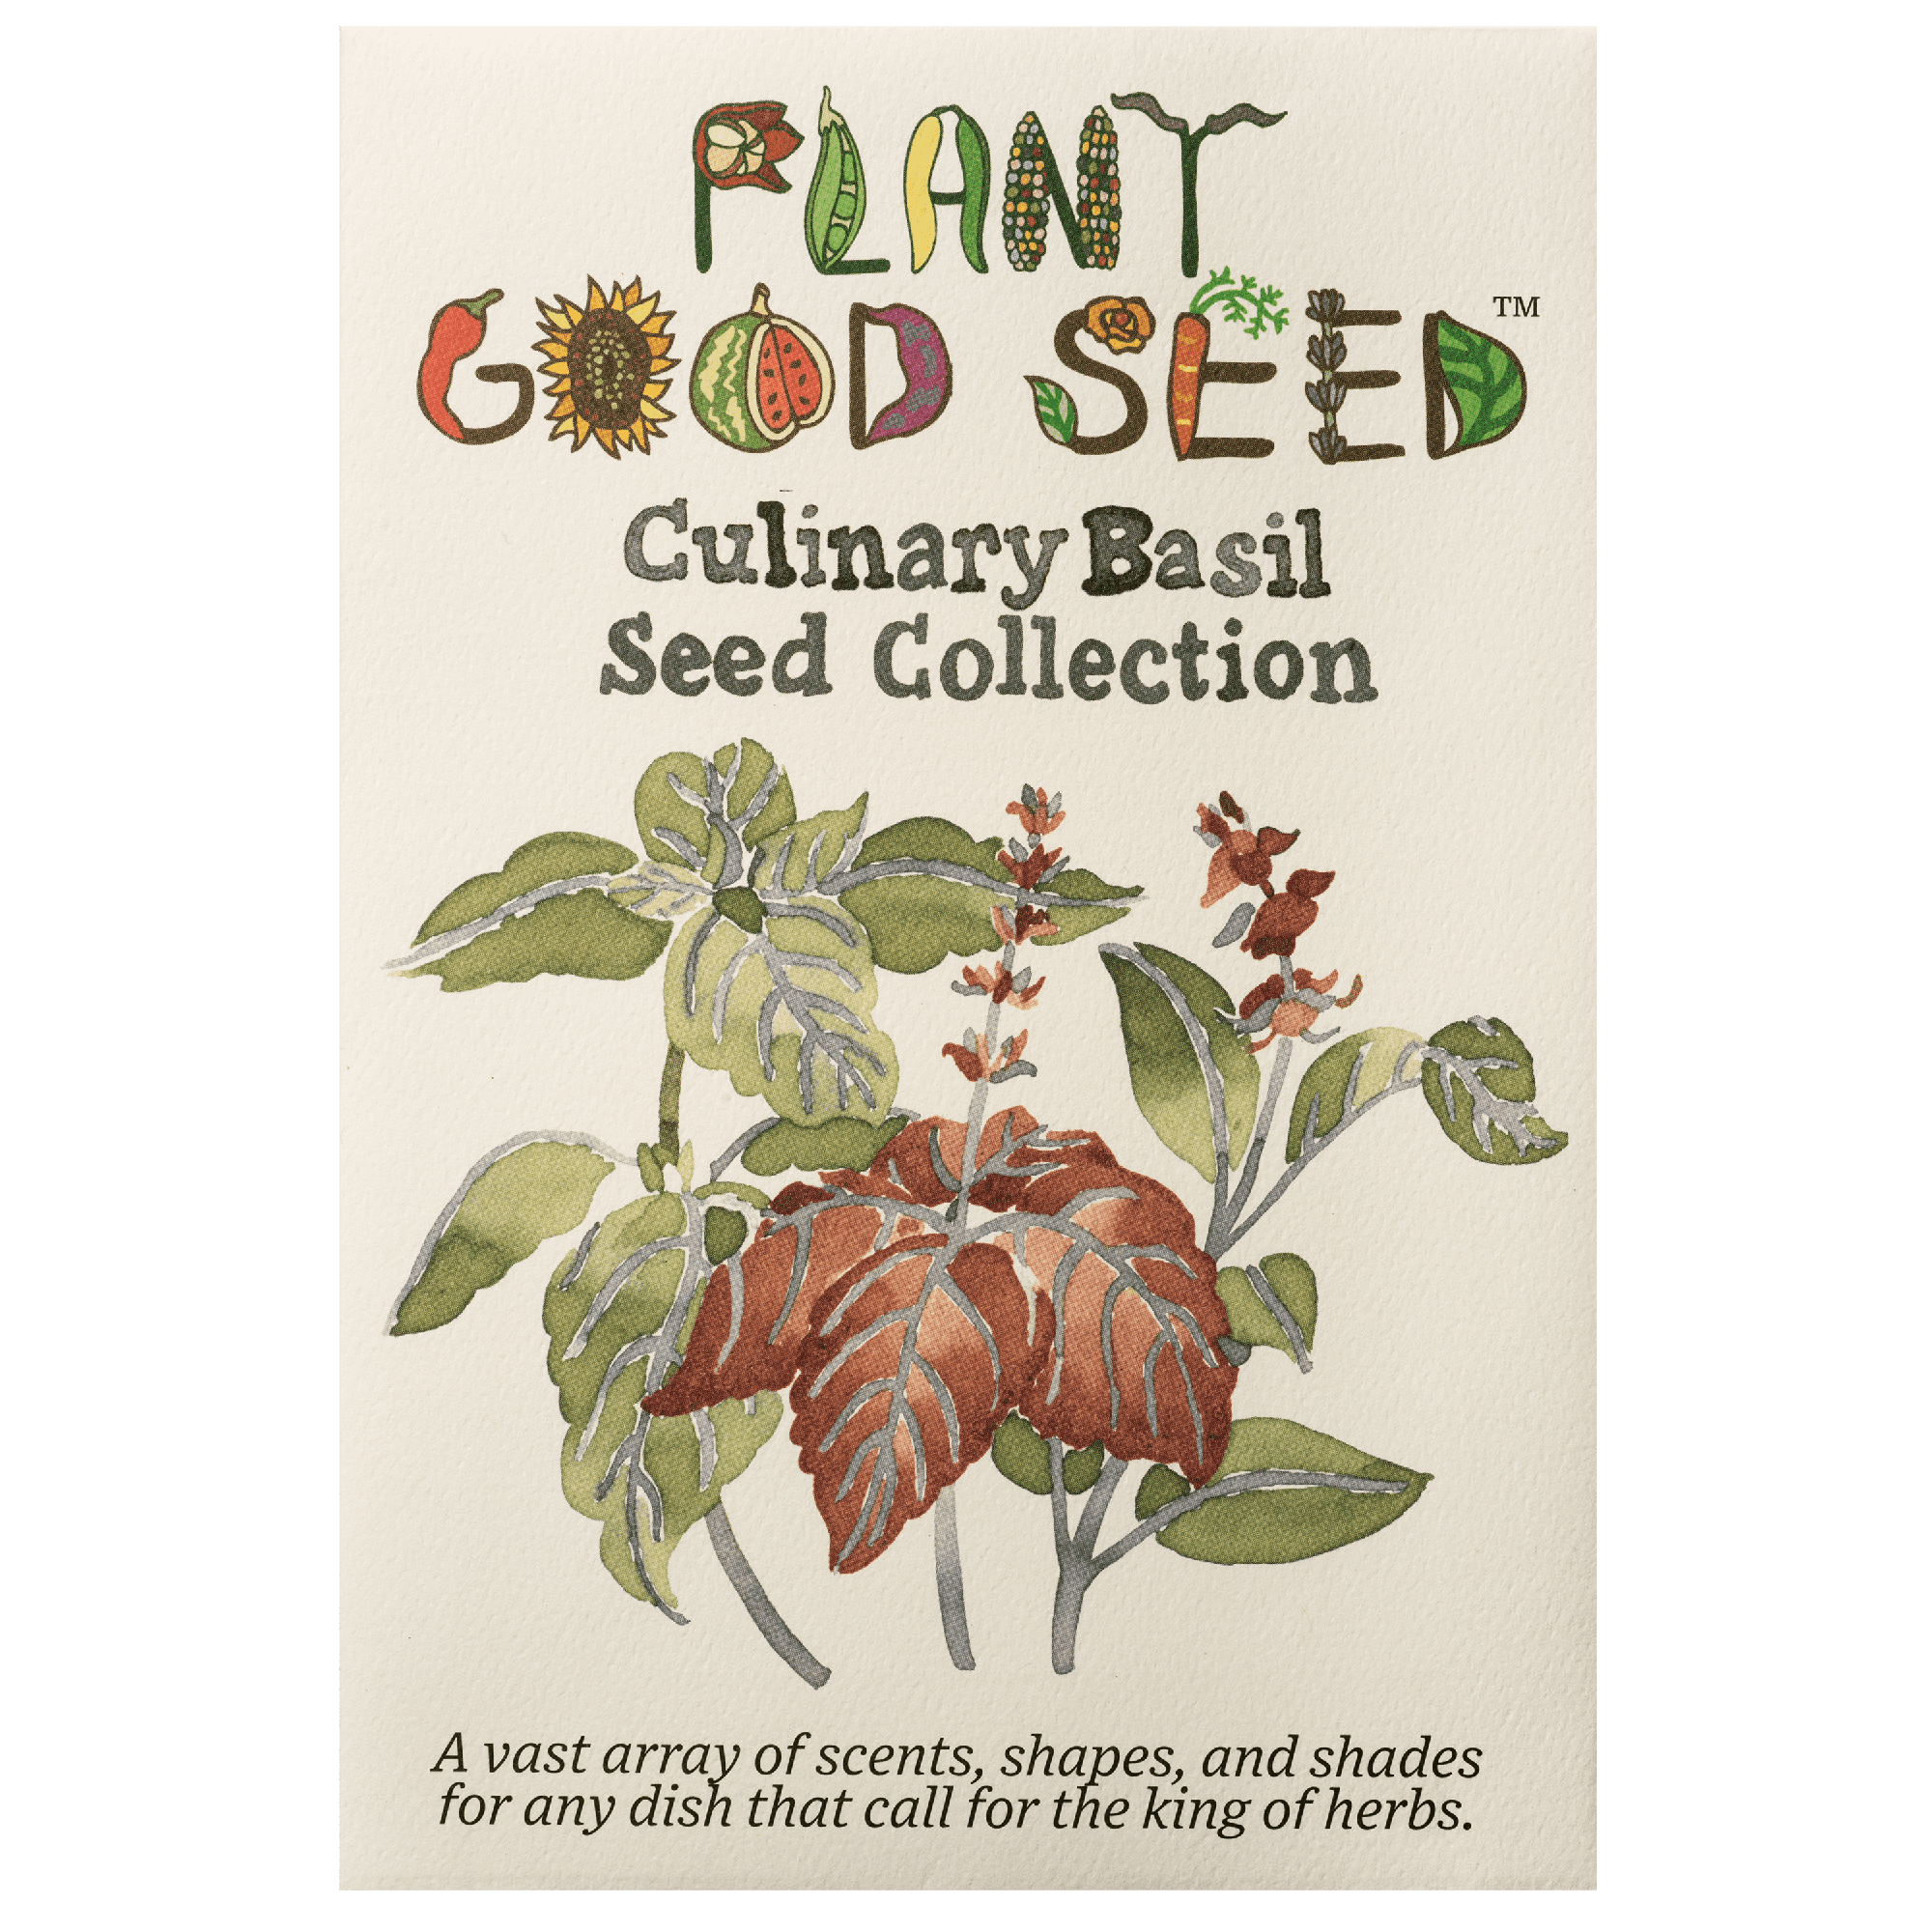 Culinary Basil Seed Collection